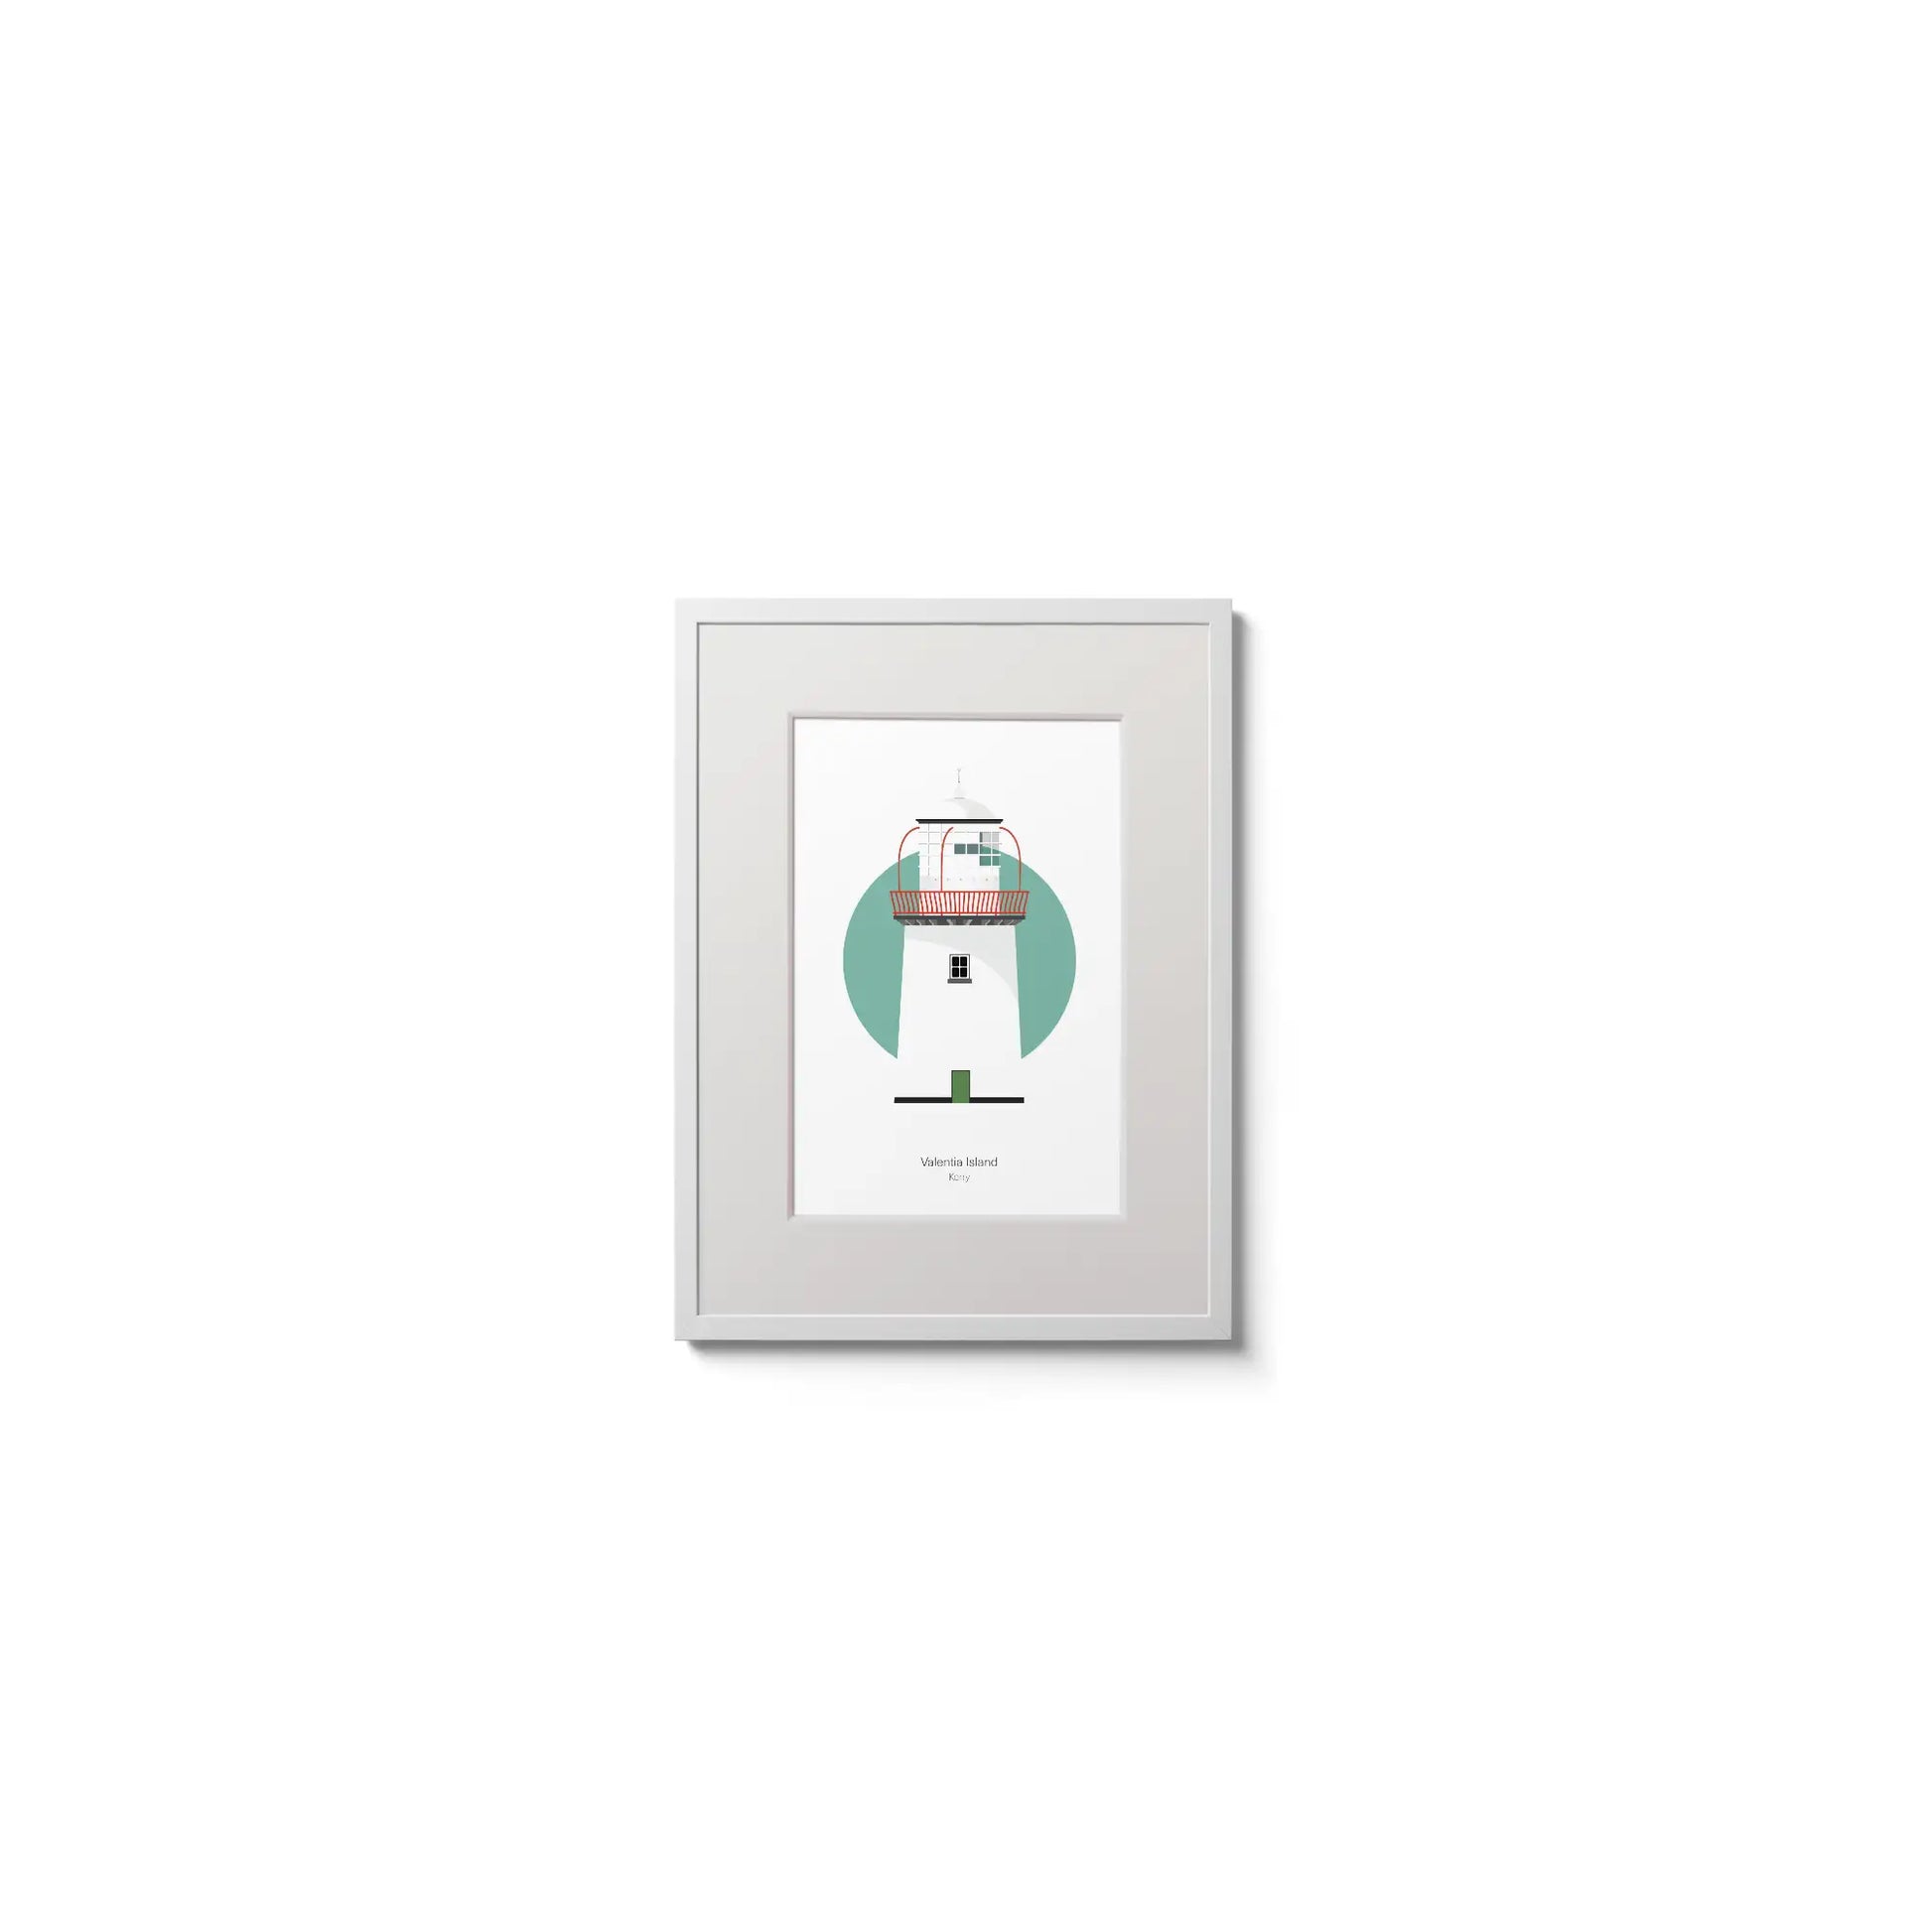 Illustration of Valentia Island lighthouse on a white background inside light blue square,  in a white frame measuring 15x20cm.